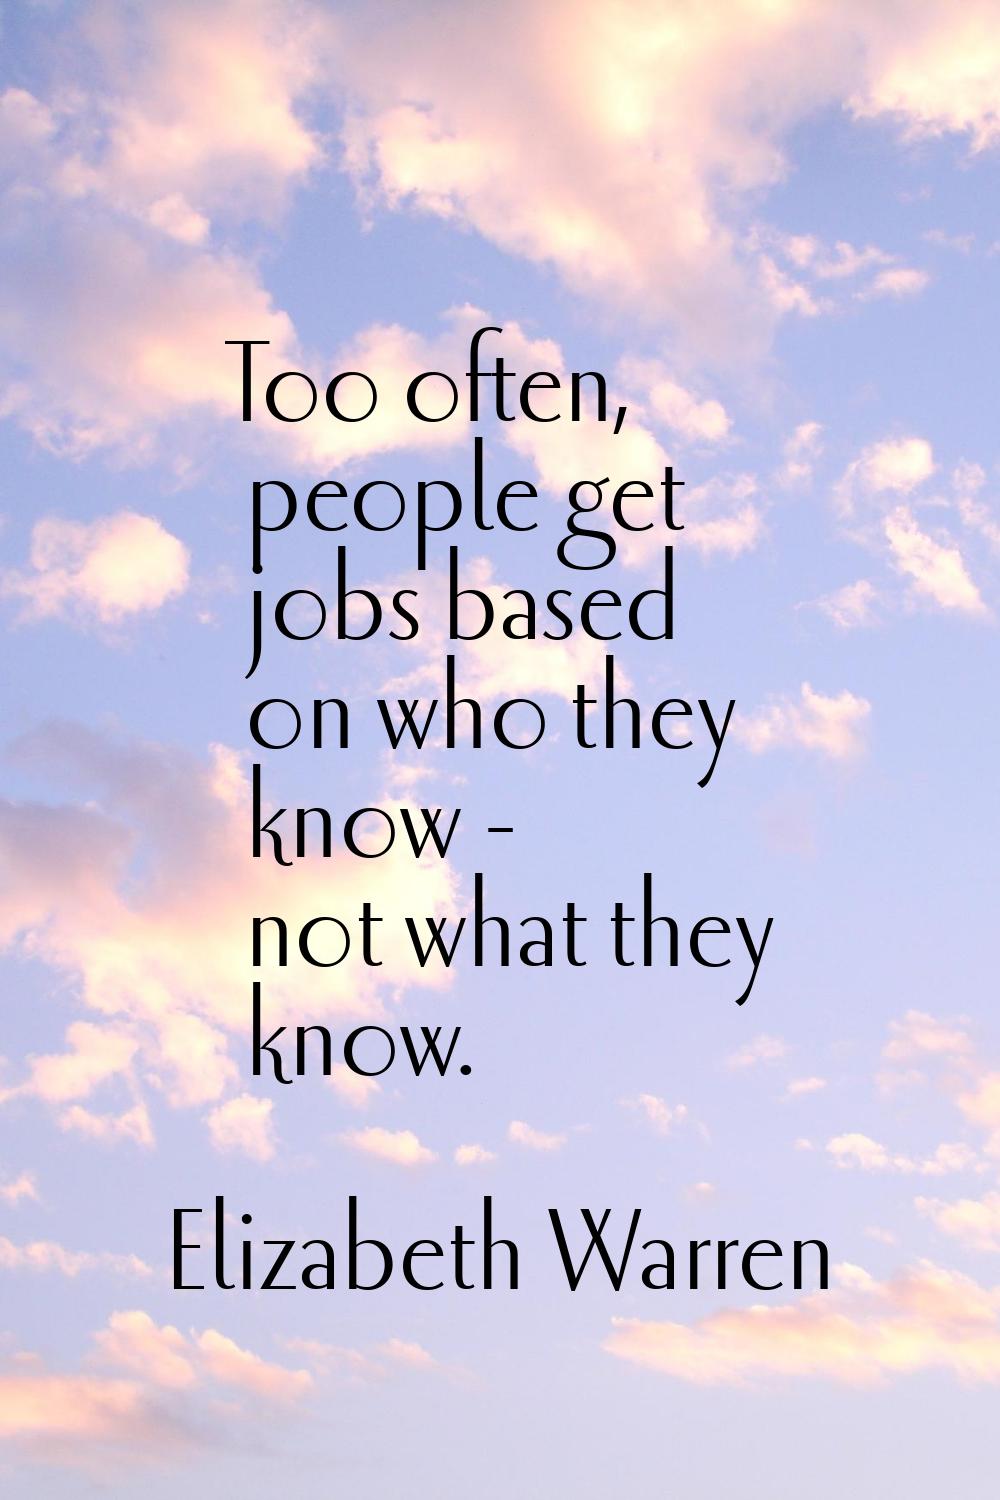 Too often, people get jobs based on who they know - not what they know.